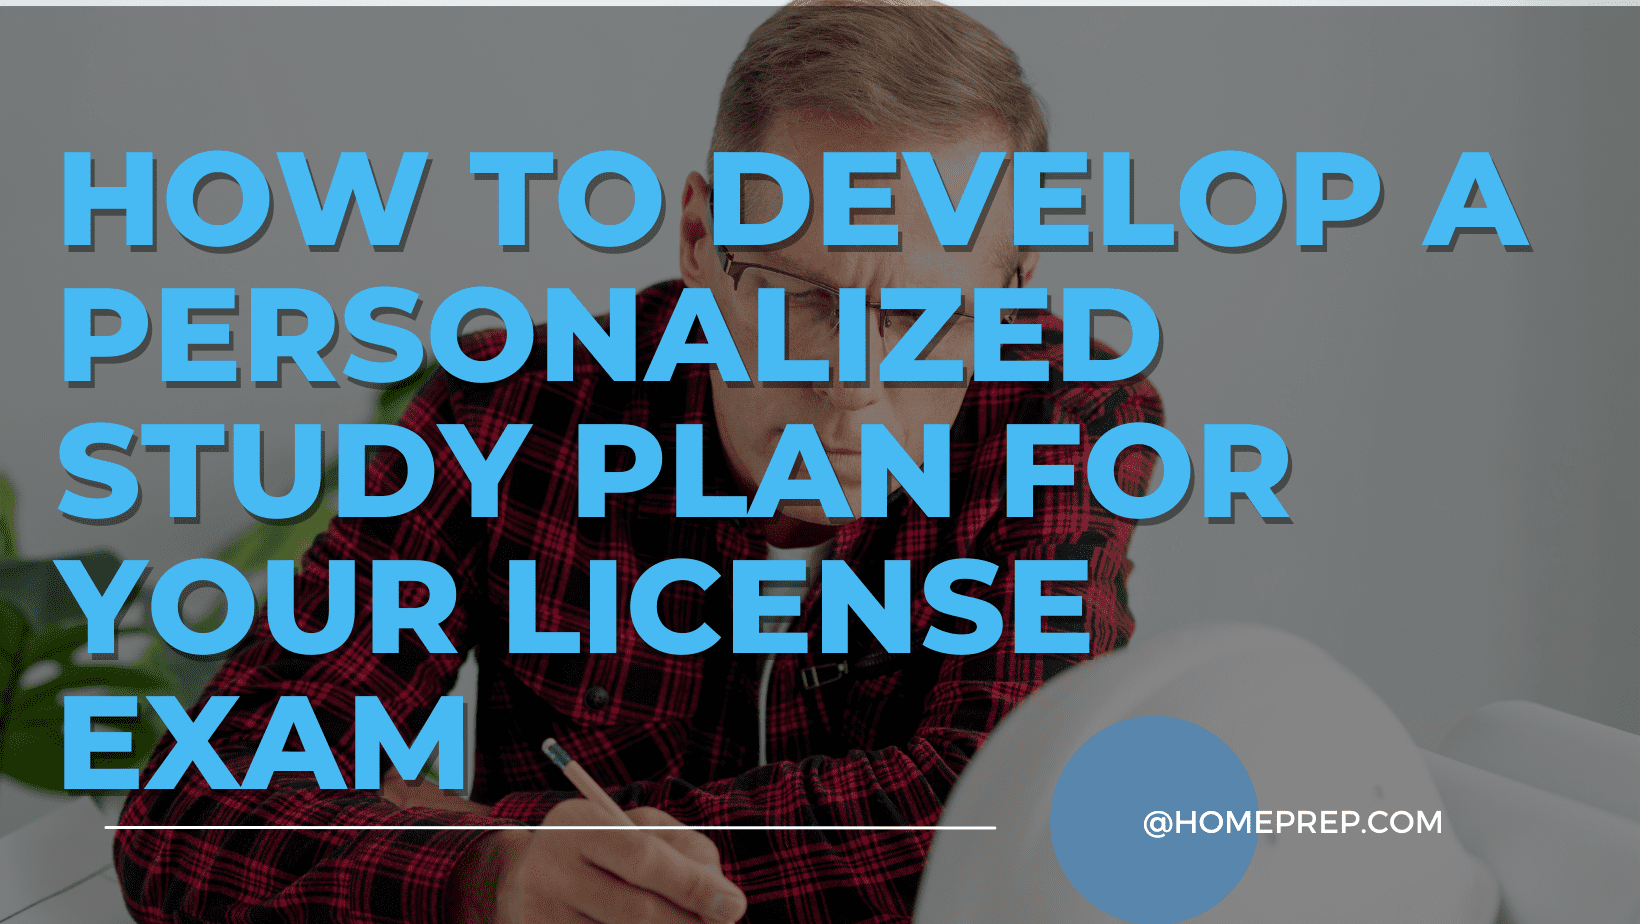 How to Develop a Personalized Study Plan for Your Contractor License Exam